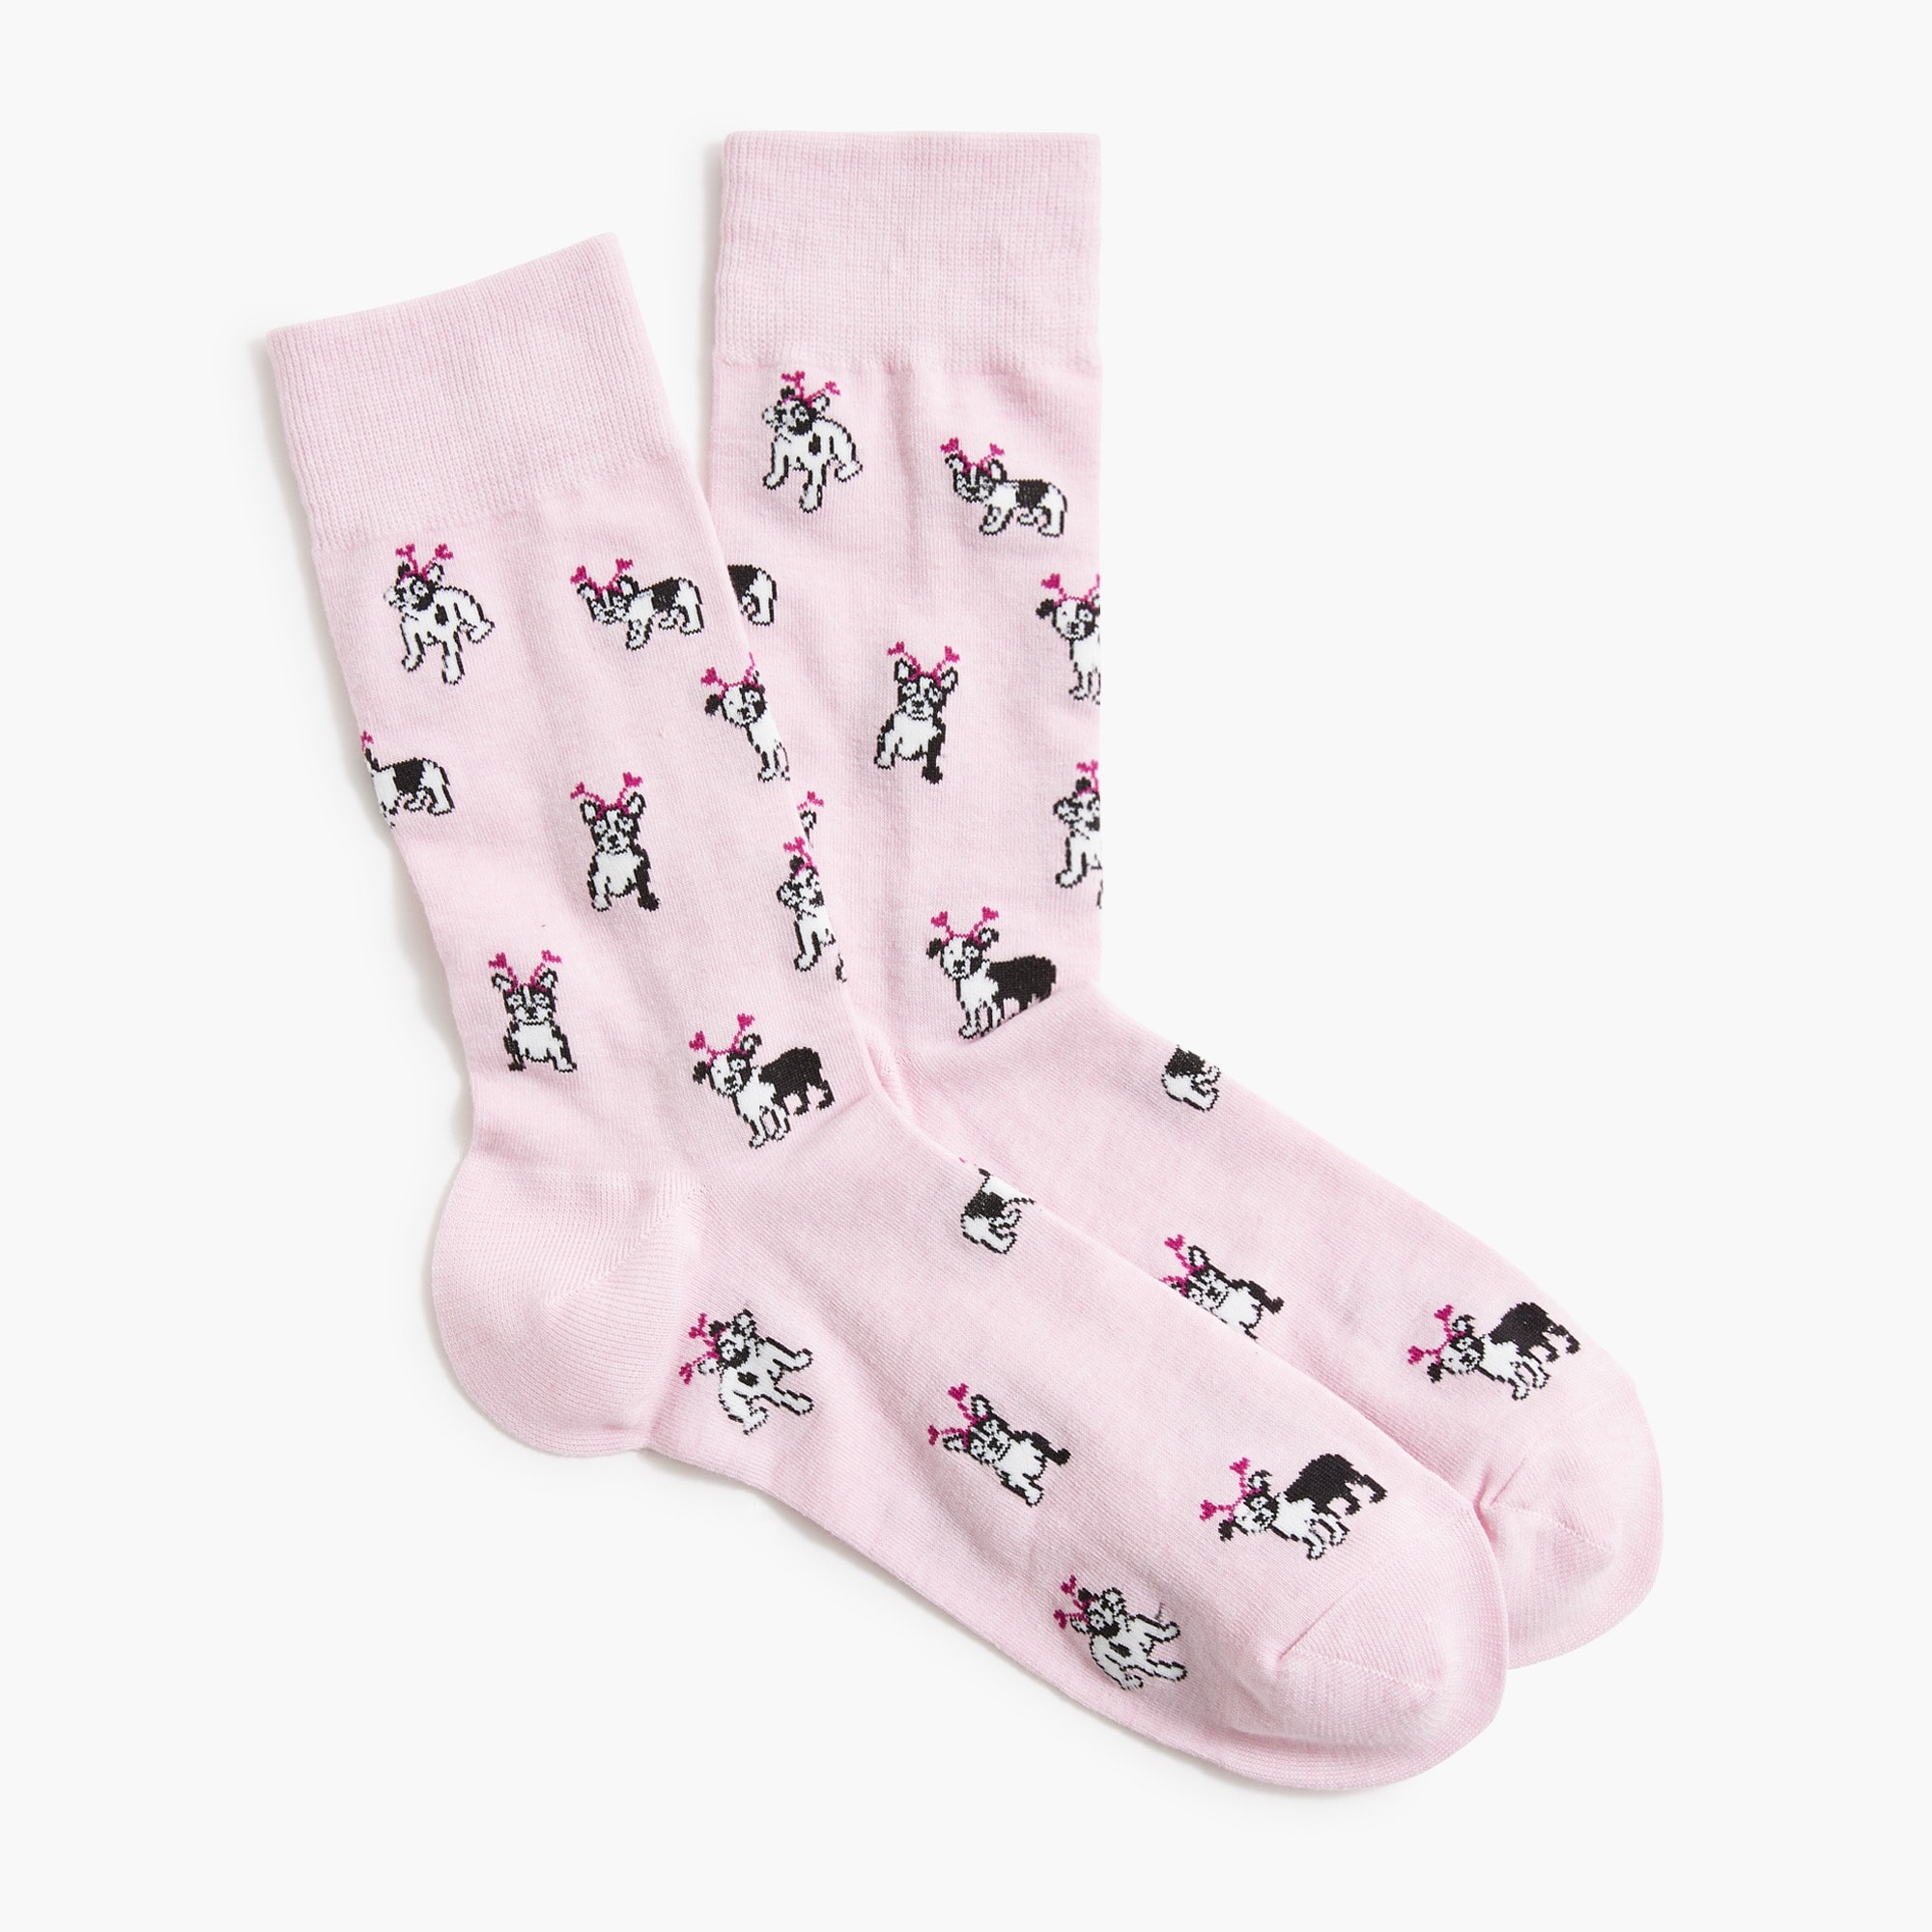  Dogs with heart socks